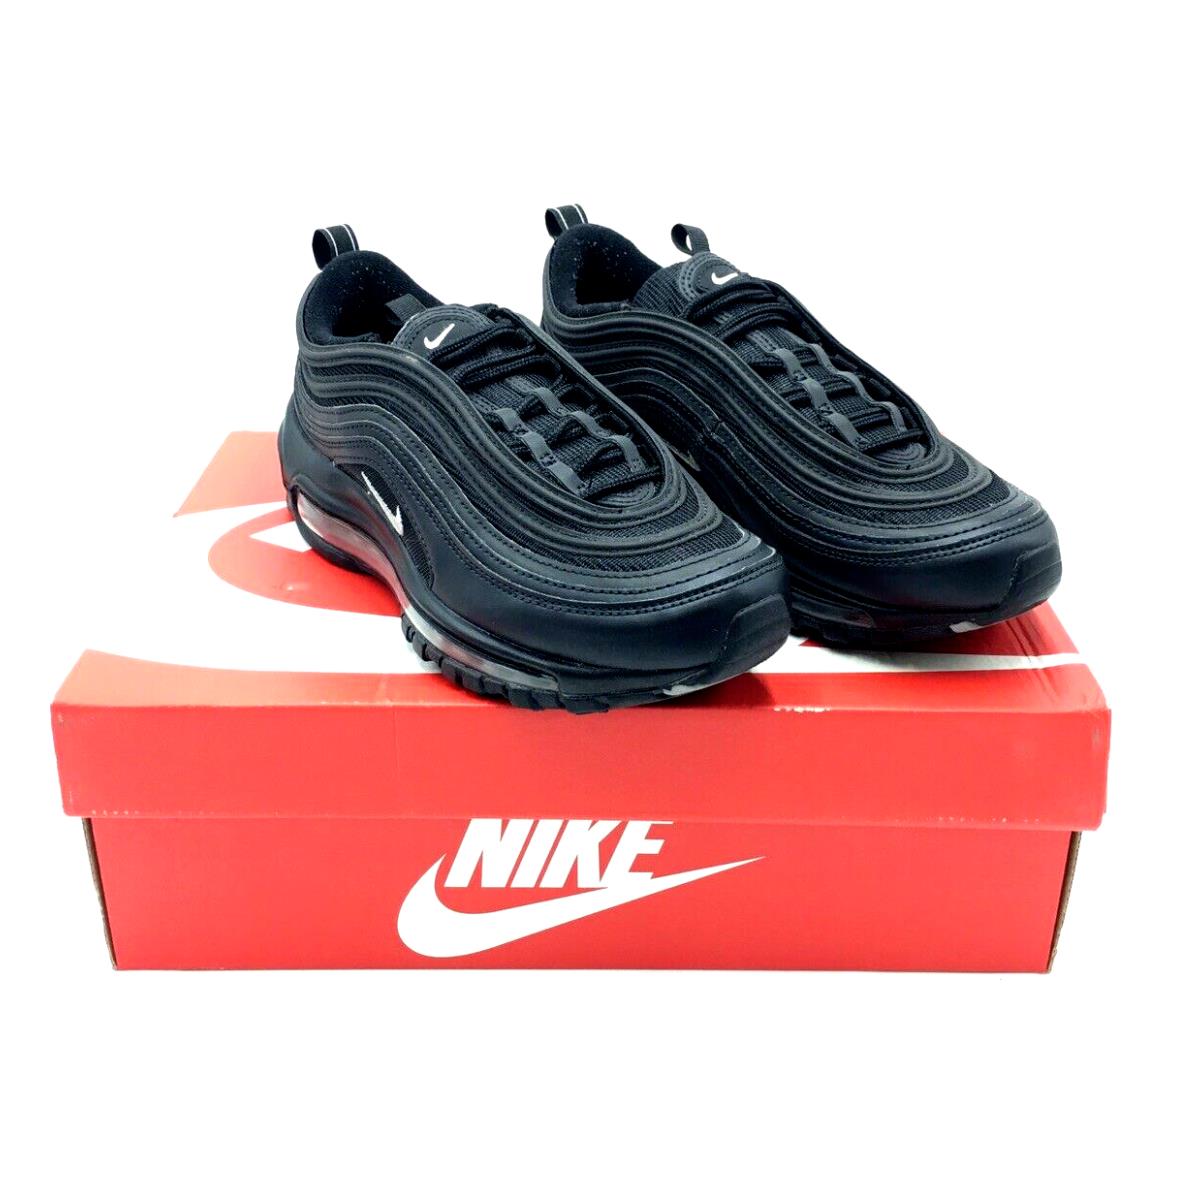 Nike Women`s Air Max 97 Running Shoes Sneakers Size 7.5 Black - 921733001 - Black